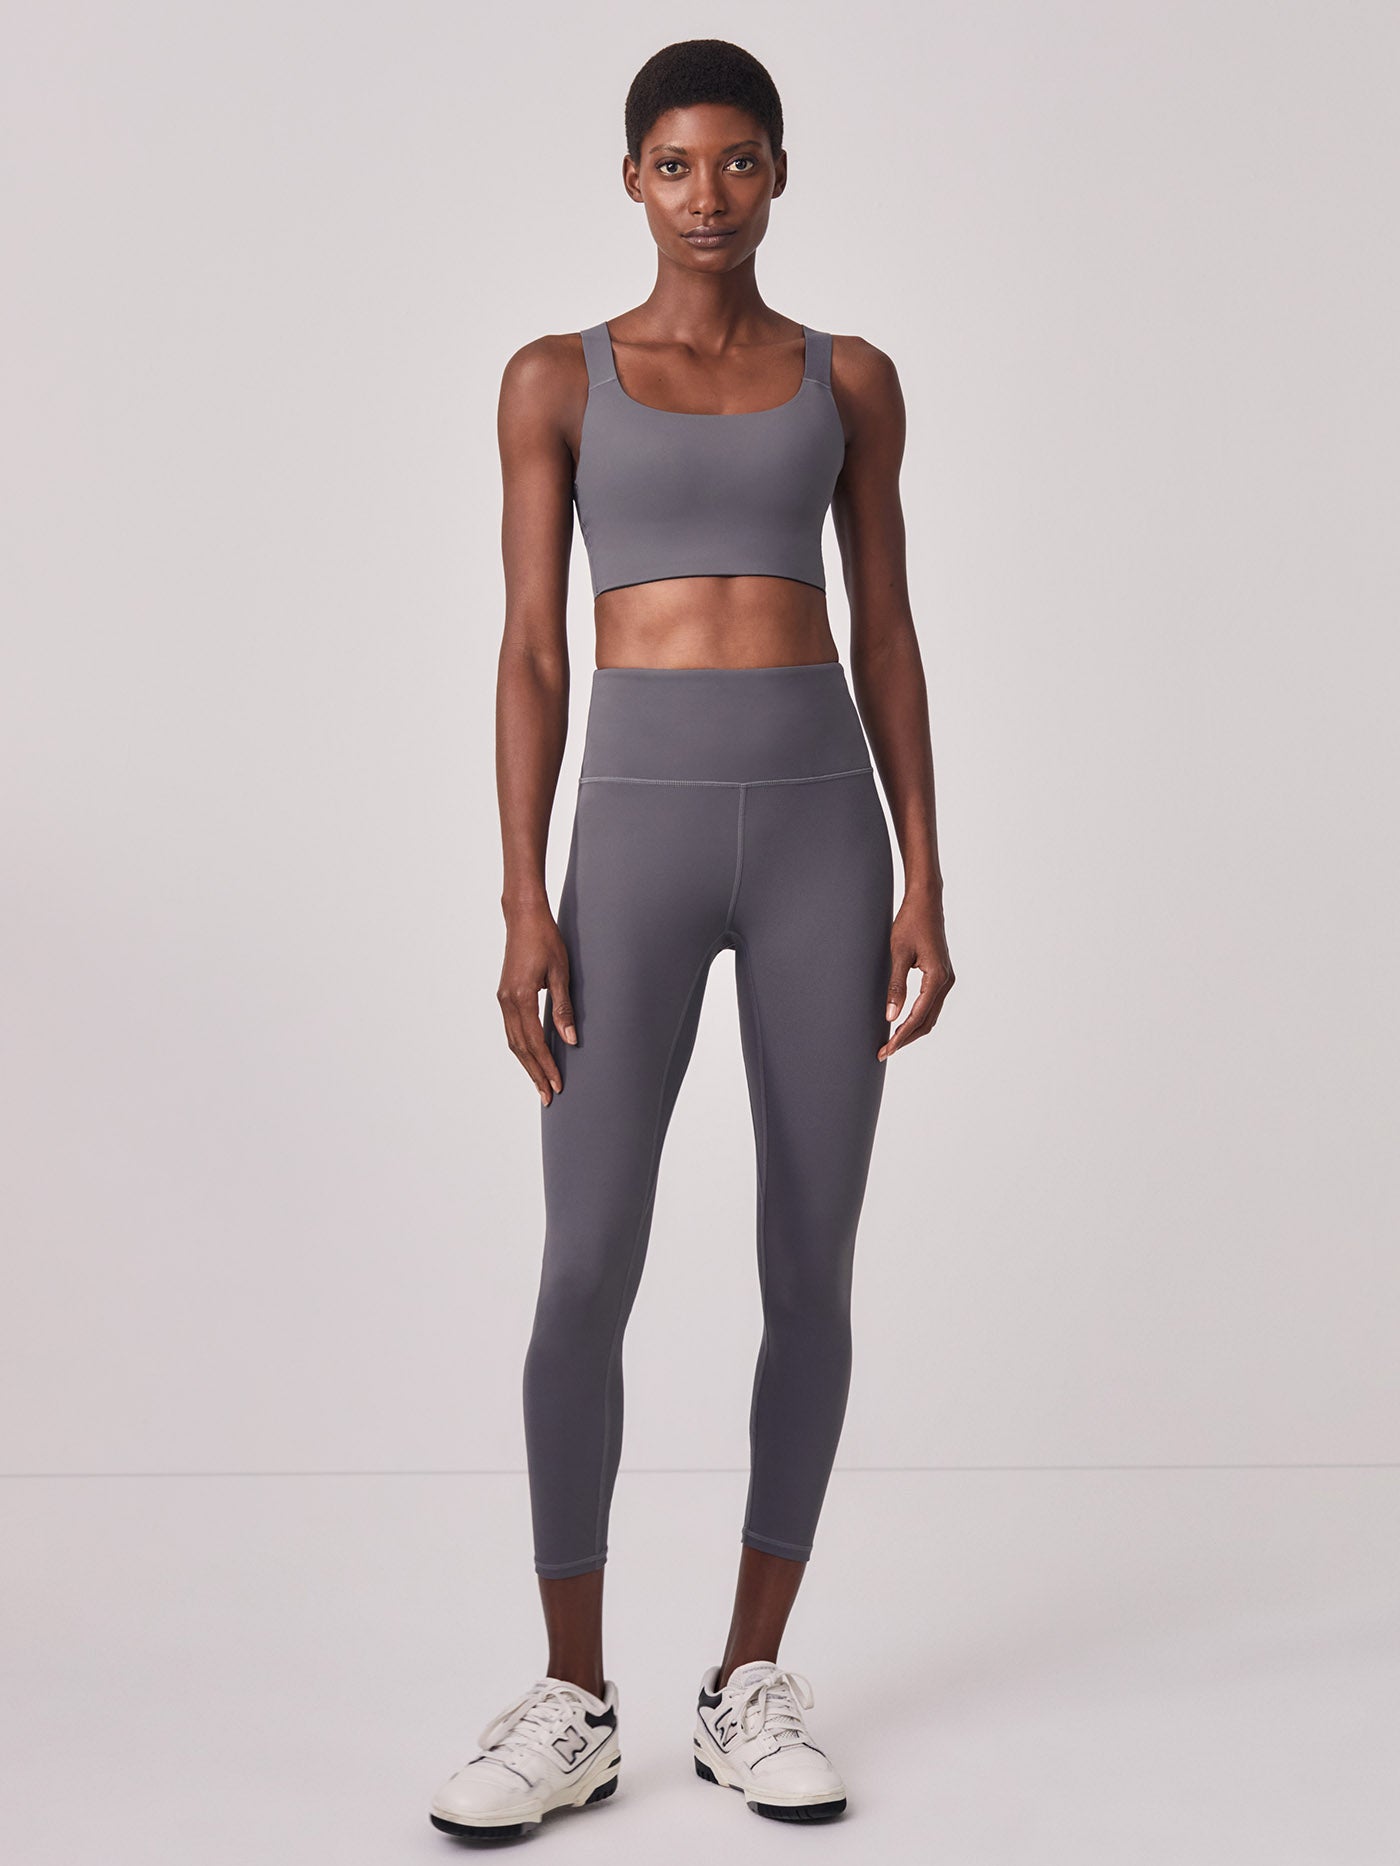 VARLEY - Always High Rise Legging // Blurred Copper Animal on  @simplyWORKOUT – SIMPLYWORKOUT